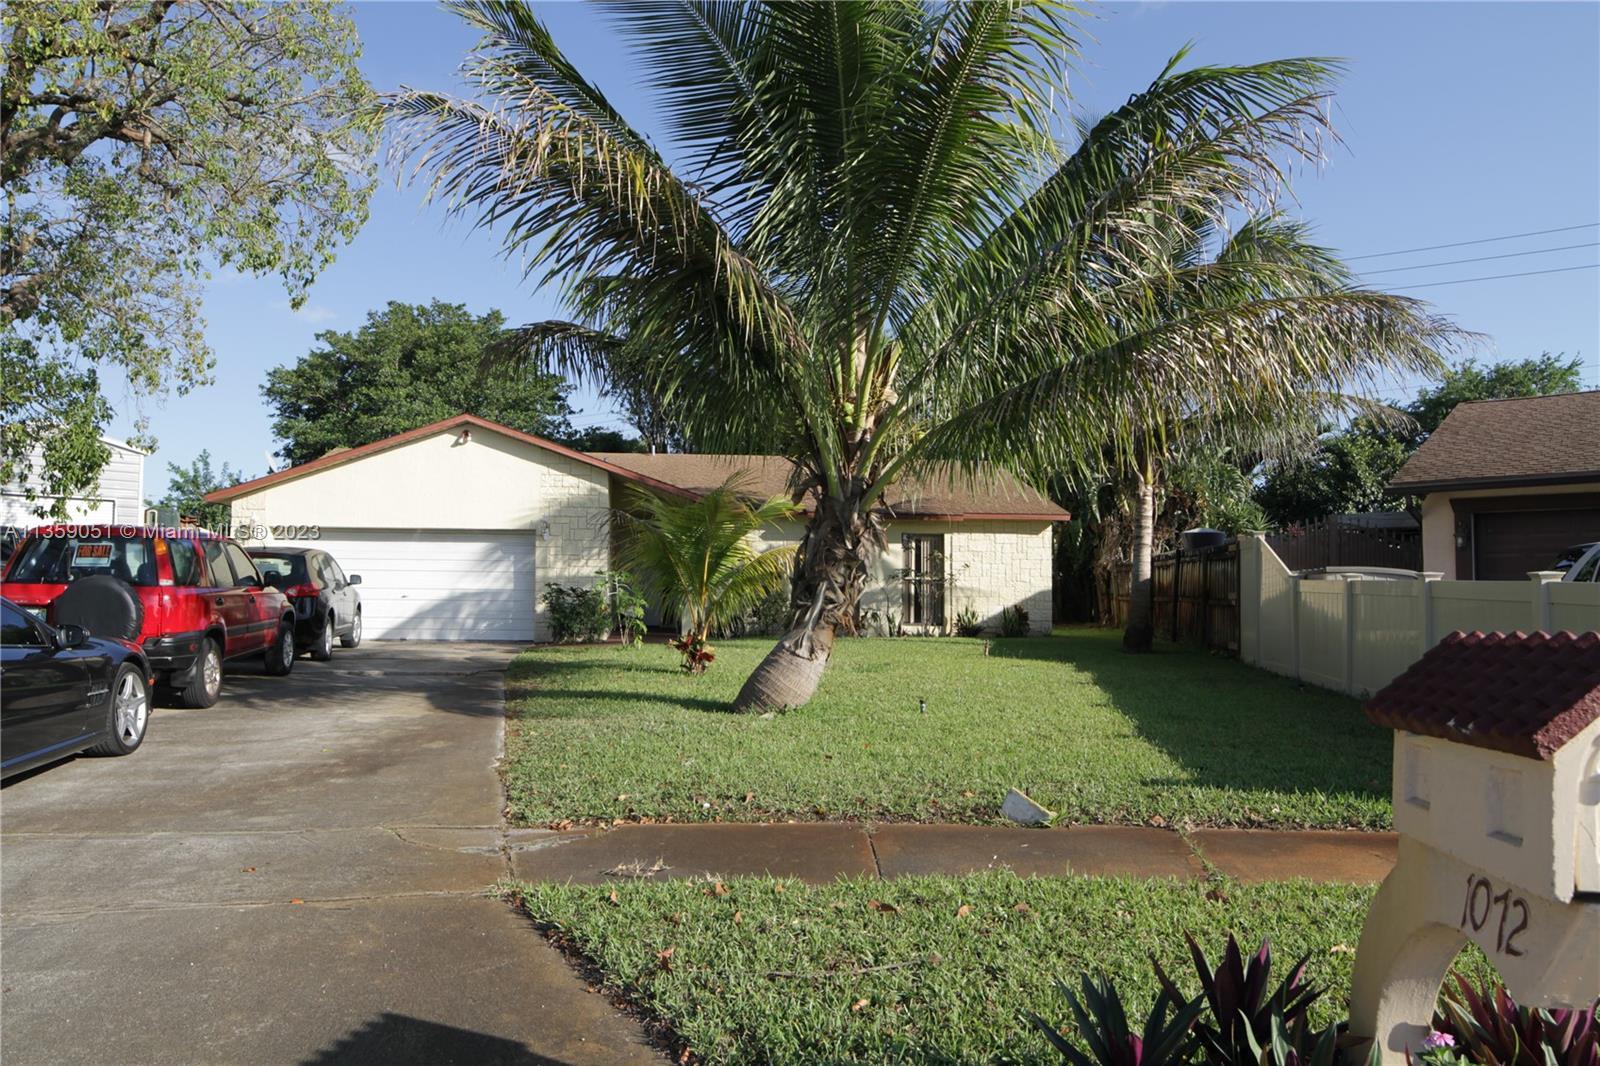 LOVELY 3 BEDROOM 2 BATH 2 CAR GARAGE HOME, LARGE FENCED YARD WITH LOTS OF FRUIT TREES. NO HOME OWNER